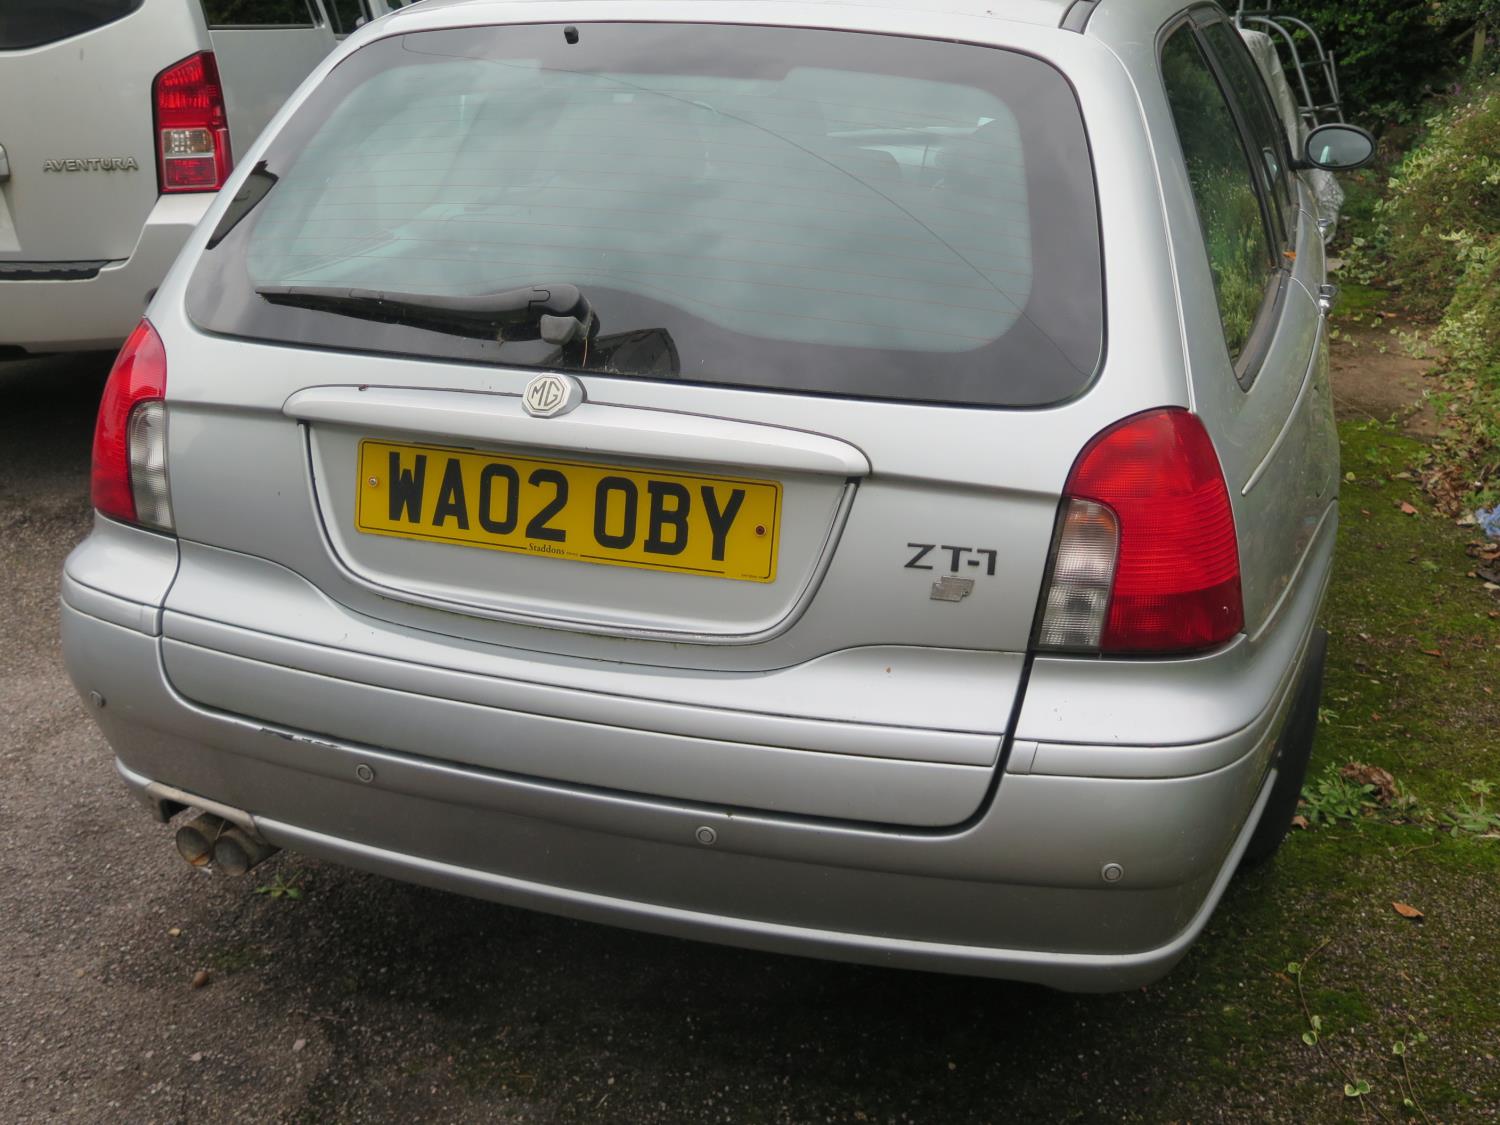 A MG ZT-T Estate in Silver low mileage (approx. 38700 miles) with MOT until October 2020. Manual - Image 6 of 9